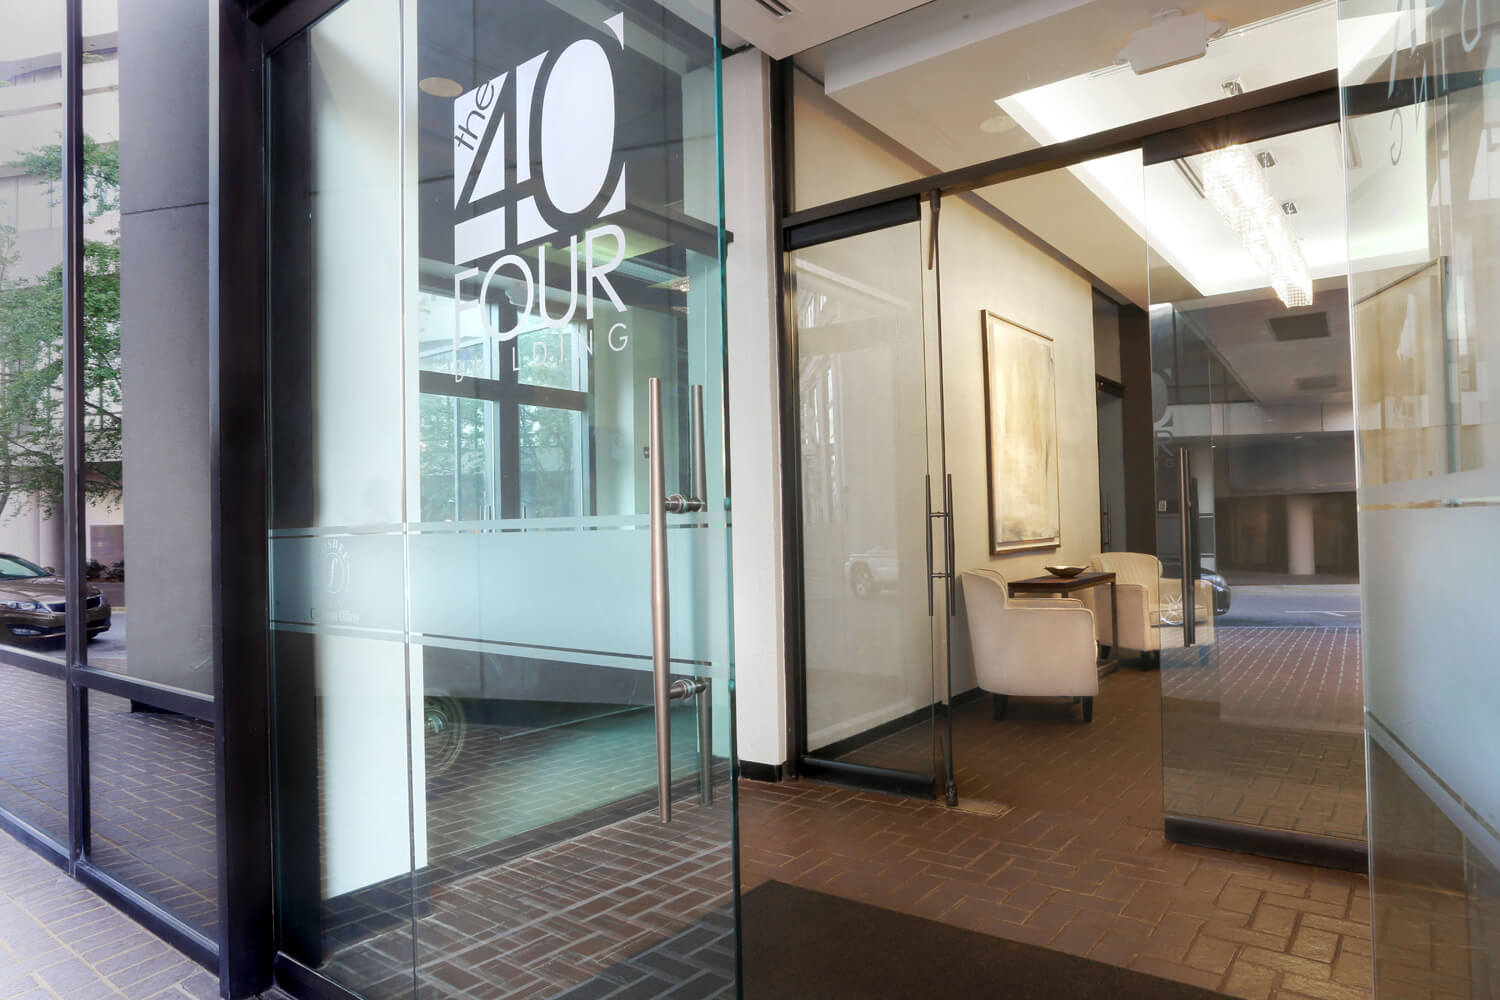 The 40 Four Building Designed by Foshee Architecture – Glass Doors at Front Entry